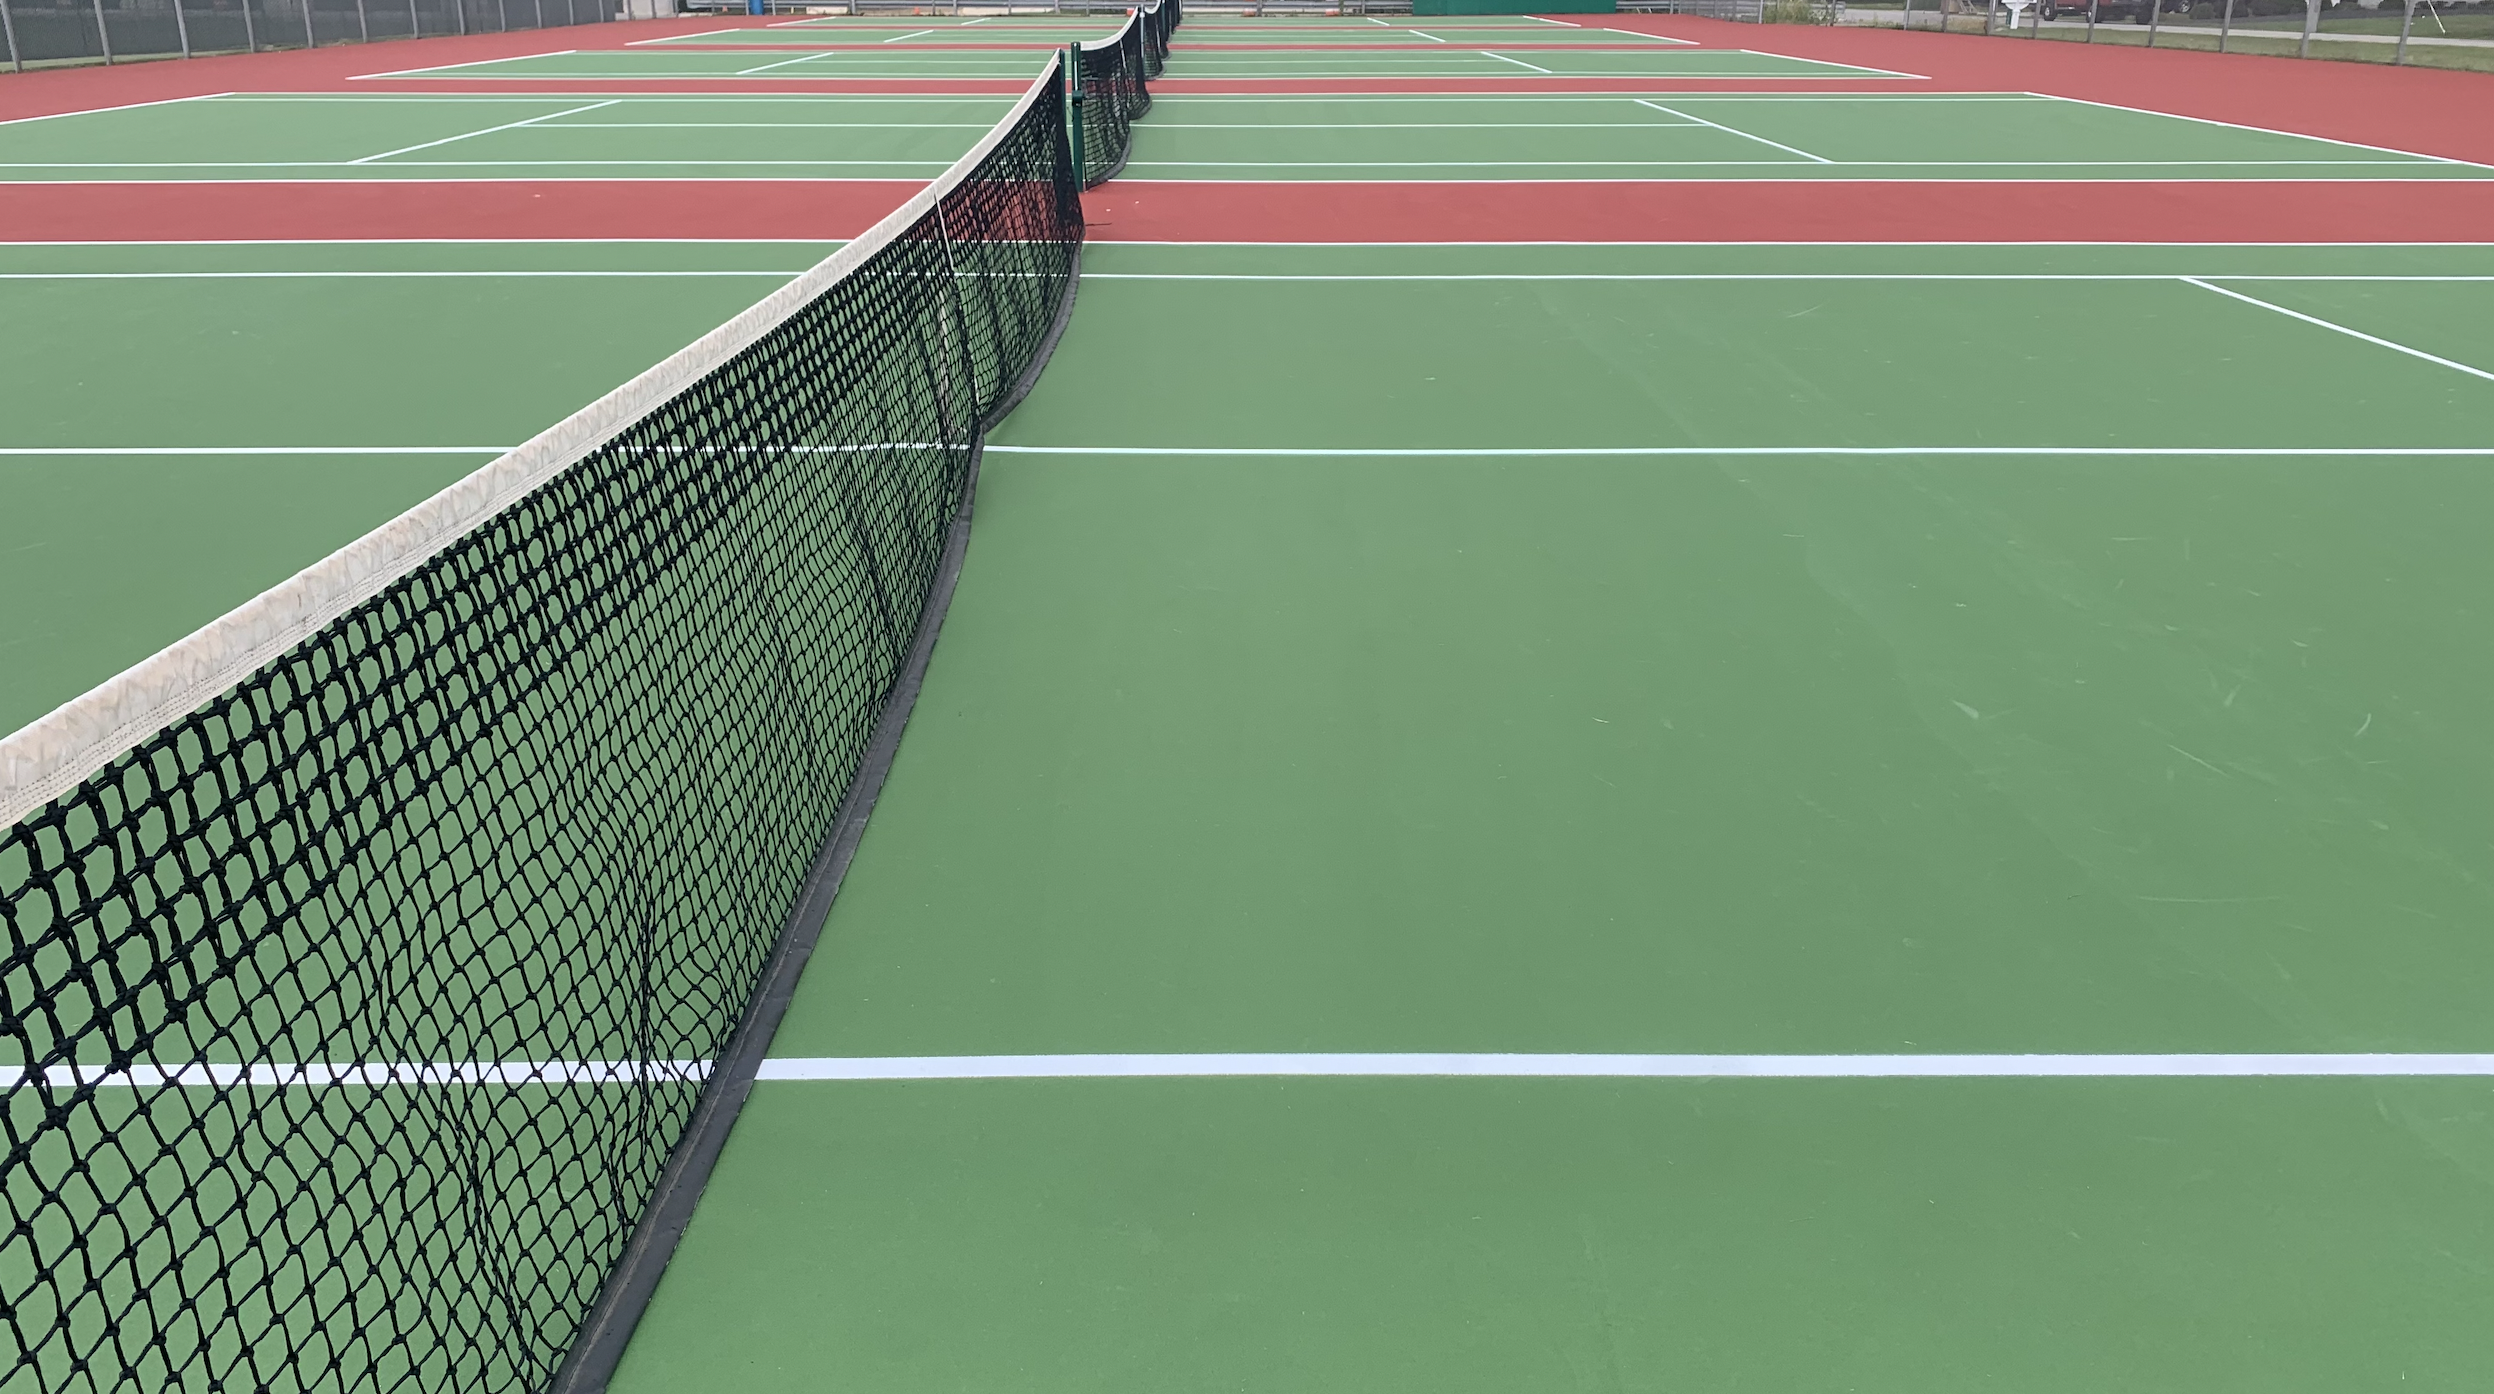 close-up view of new tennis court